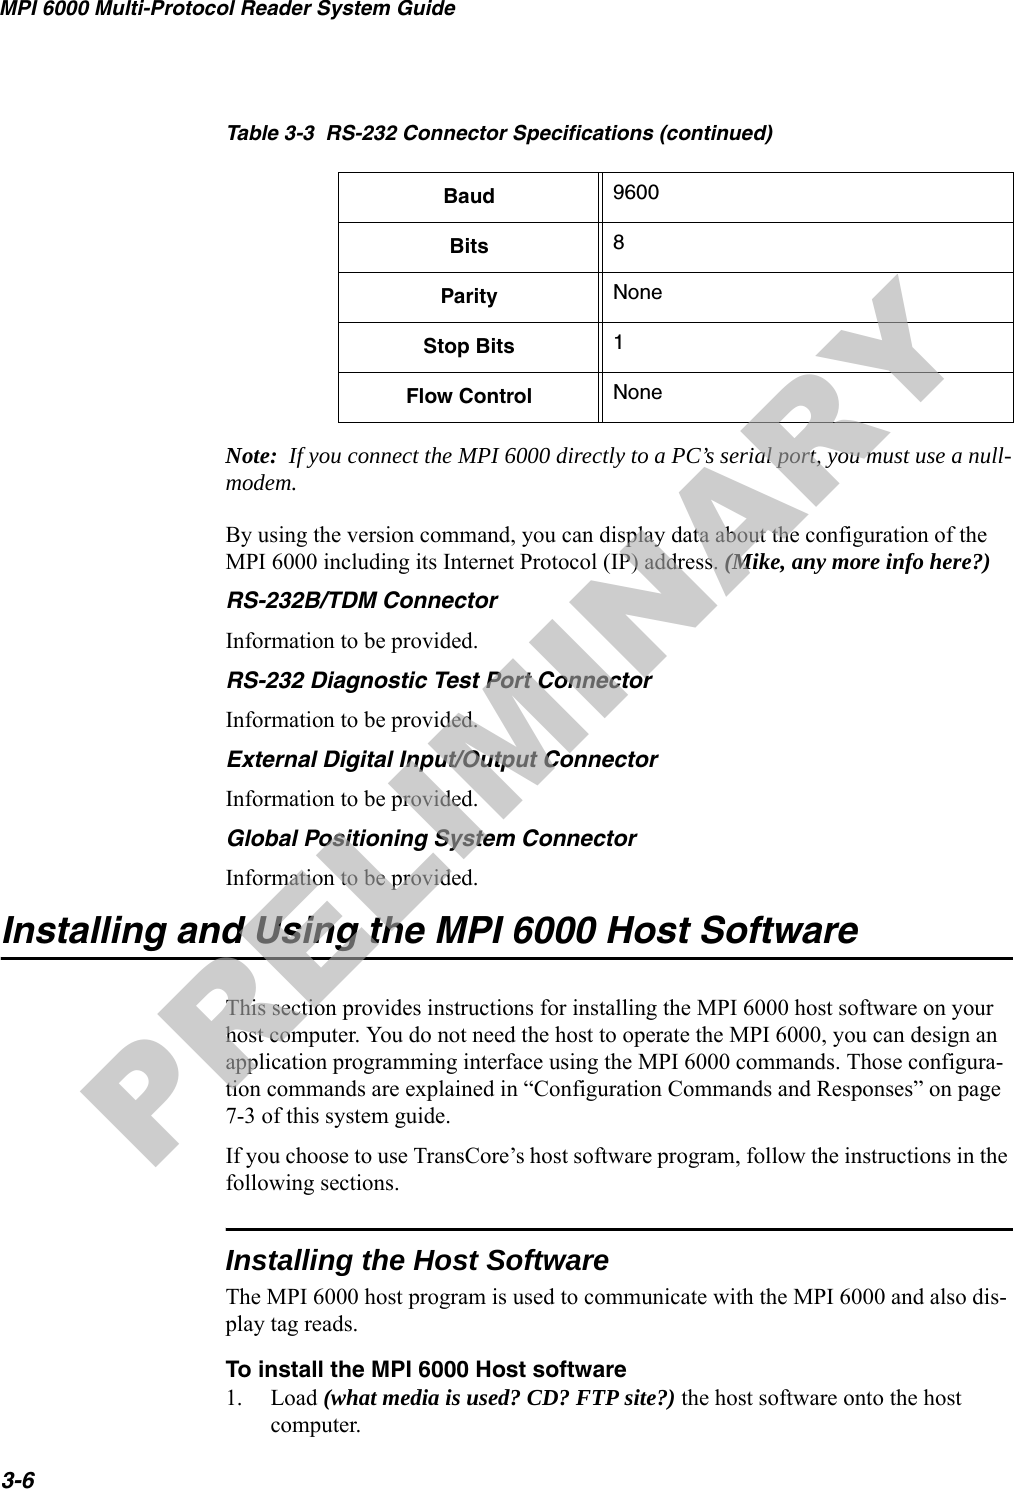 MPI 6000 Multi-Protocol Reader System Guide3-6Note:  If you connect the MPI 6000 directly to a PC’s serial port, you must use a null-modem.By using the version command, you can display data about the configuration of the MPI 6000 including its Internet Protocol (IP) address. (Mike, any more info here?)RS-232B/TDM ConnectorInformation to be provided. RS-232 Diagnostic Test Port ConnectorInformation to be provided.External Digital Input/Output ConnectorInformation to be provided.Global Positioning System ConnectorInformation to be provided.Installing and Using the MPI 6000 Host SoftwareThis section provides instructions for installing the MPI 6000 host software on your host computer. You do not need the host to operate the MPI 6000, you can design an application programming interface using the MPI 6000 commands. Those configura-tion commands are explained in “Configuration Commands and Responses” on page 7-3 of this system guide.If you choose to use TransCore’s host software program, follow the instructions in the following sections.Installing the Host SoftwareThe MPI 6000 host program is used to communicate with the MPI 6000 and also dis-play tag reads.To install the MPI 6000 Host software1. Load (what media is used? CD? FTP site?) the host software onto the host computer. Baud 9600Bits 8Parity NoneStop Bits 1Flow Control NoneTable 3-3  RS-232 Connector Specifications (continued)PRELIMINARY